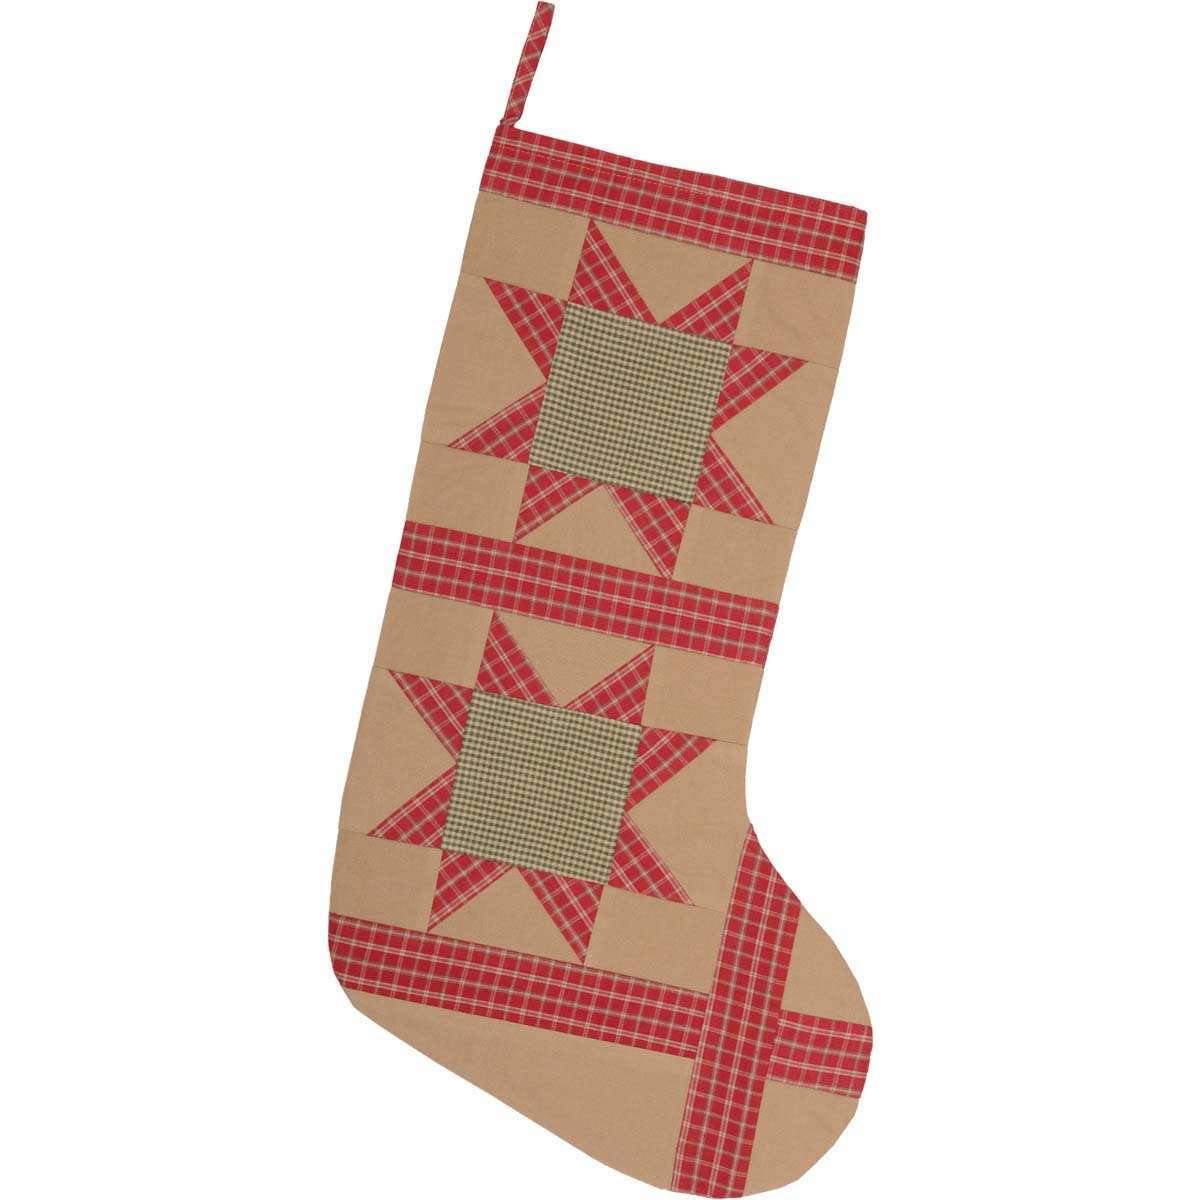 Dolly Star Tan Patch Stocking 12x20 VHC Brands - The Fox Decor